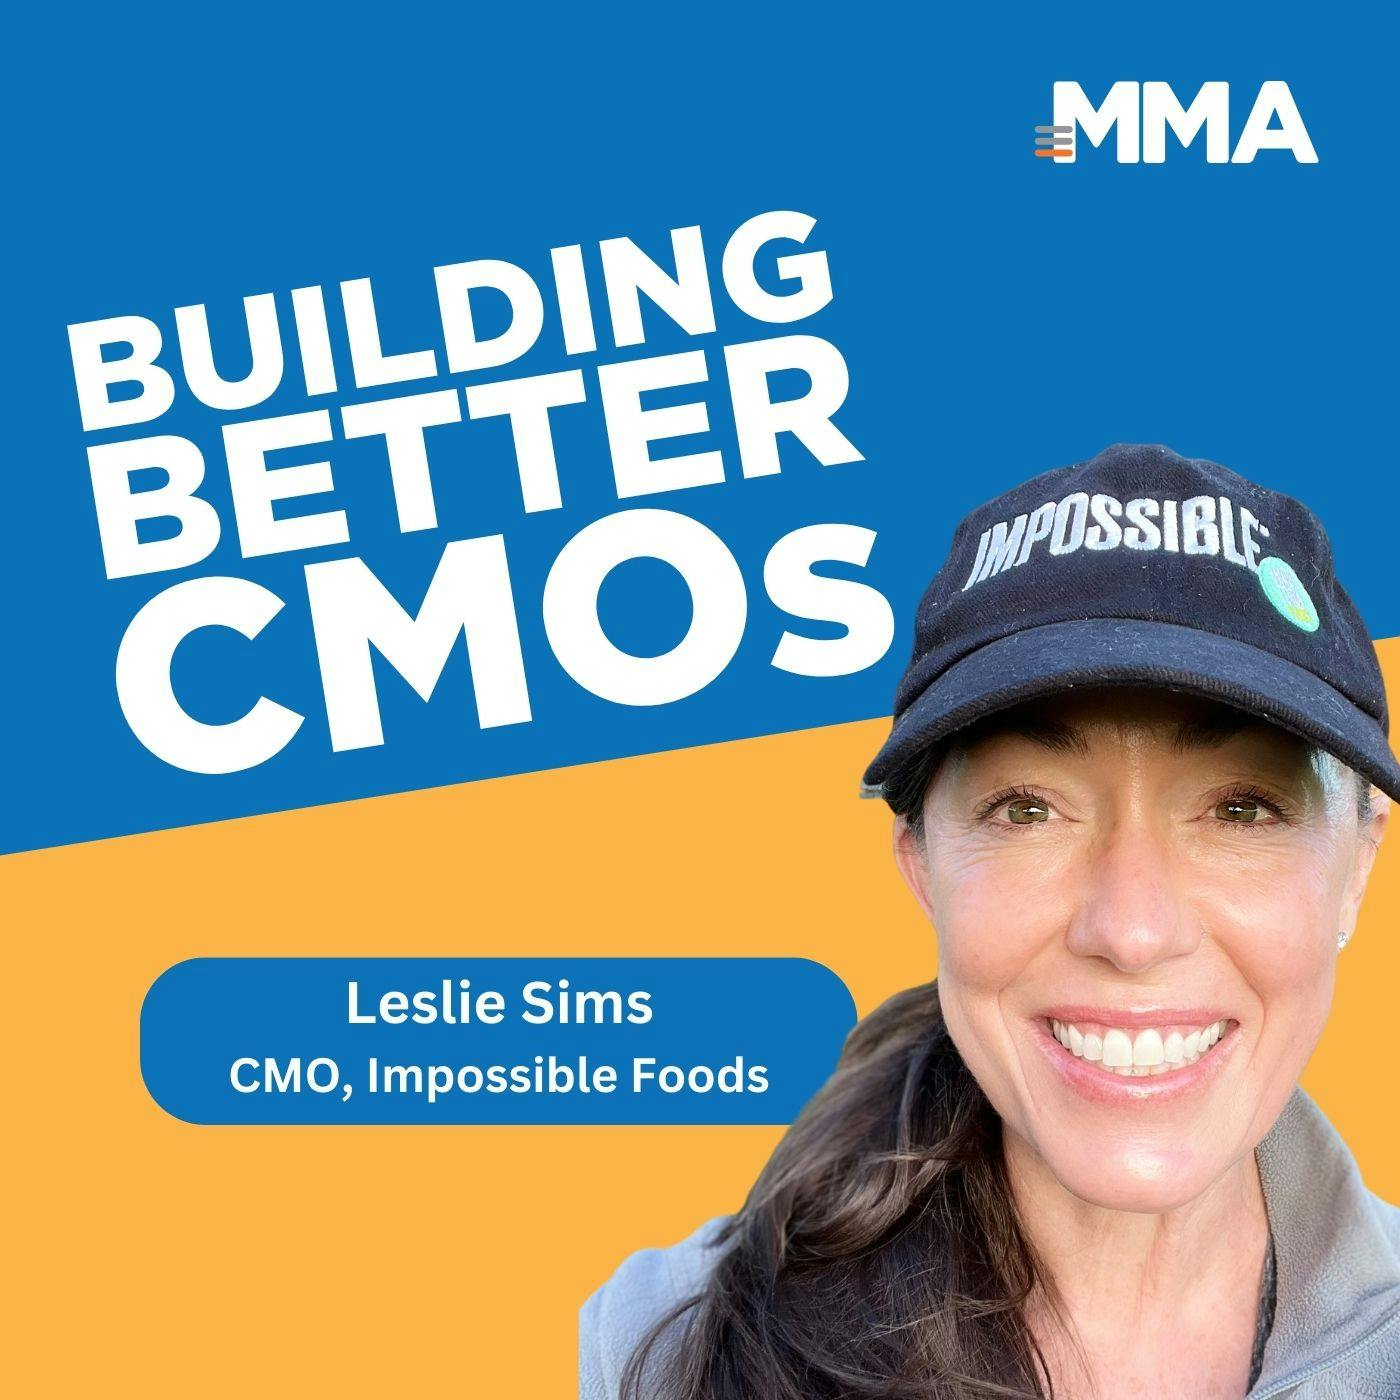 Leslie Sims, CMO of Impossible Foods: Remember the Human